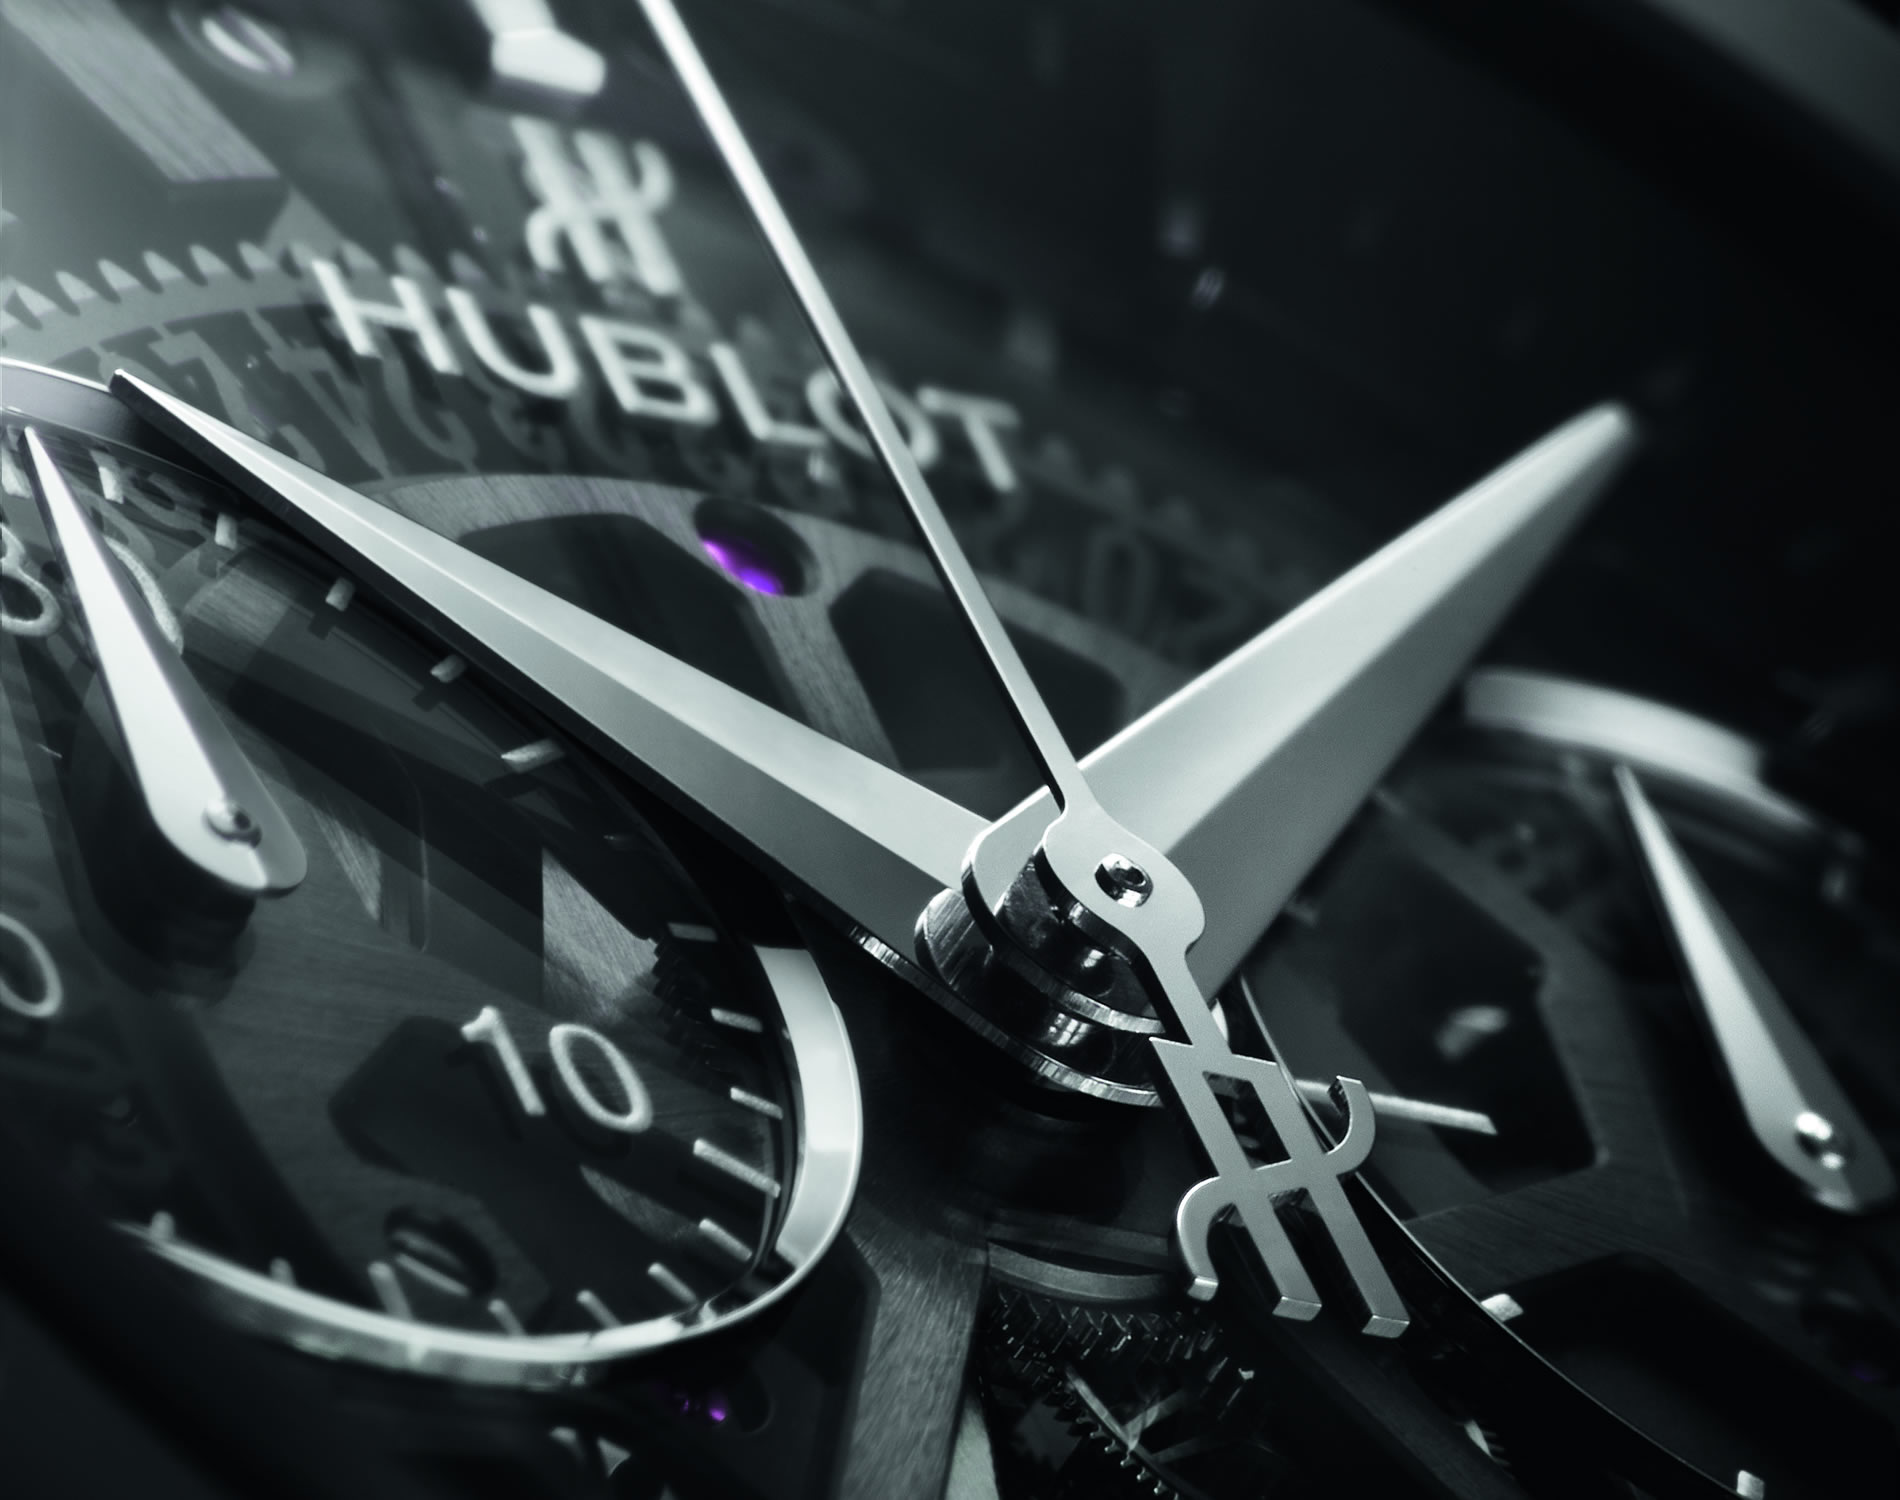 HUBLOT PRESENTS A NEW CLASSIC FUSION SCULPTED BY RICHARD ORLINSKI, THE WORLD’S BESTSELLING CONTEMPORARY FRENCH ARTIST